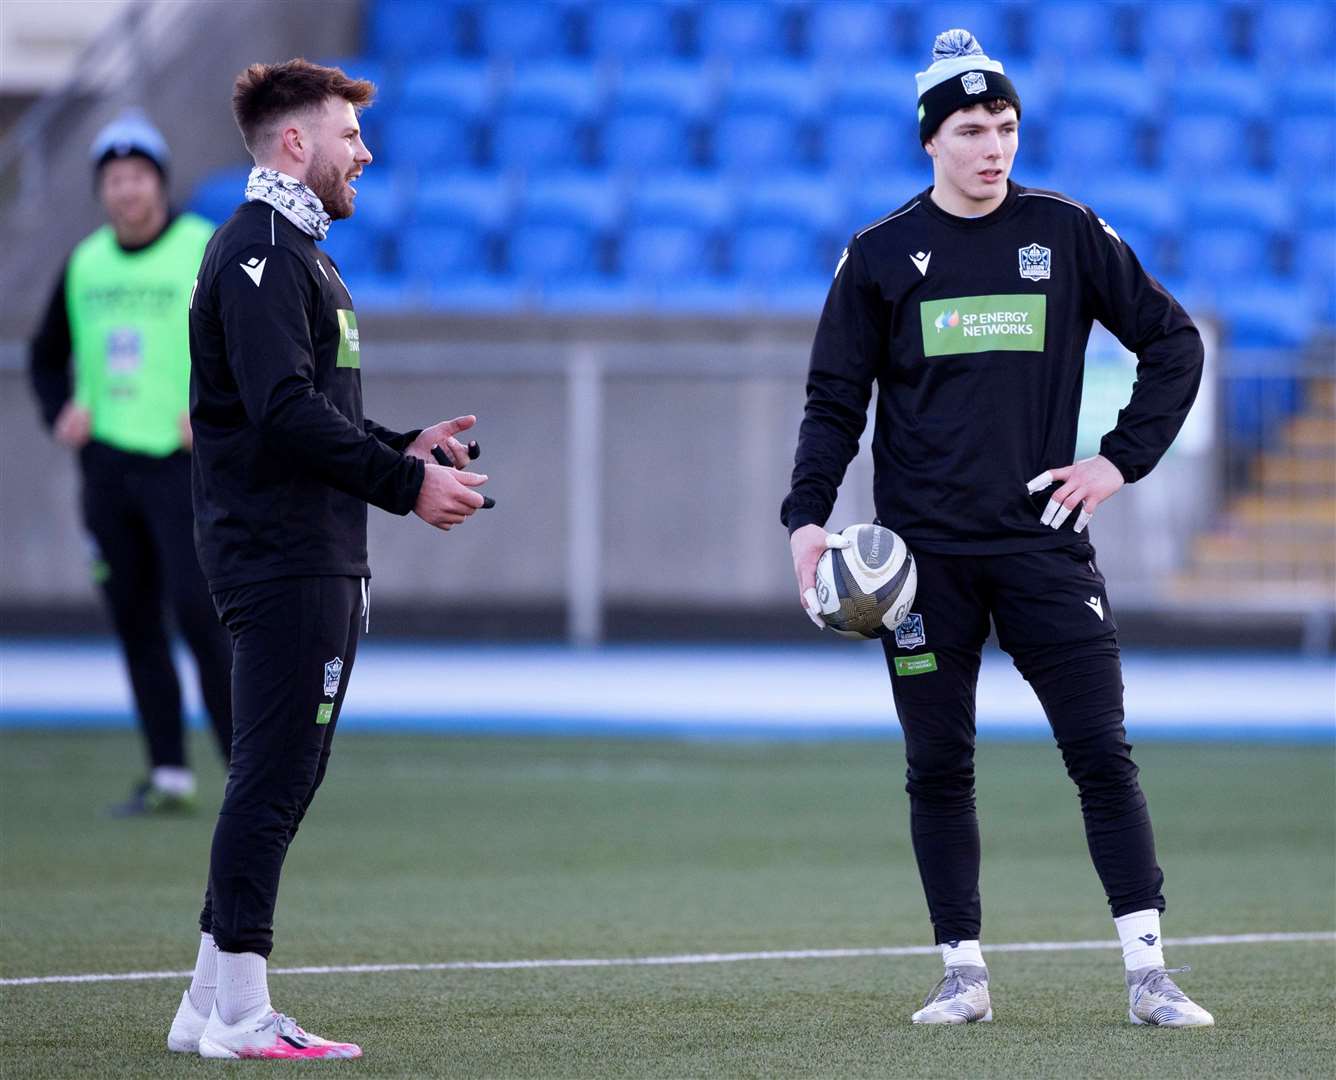 Jamie Dobie (right) has been called up to the Scotland squad and could make his international debut against France.